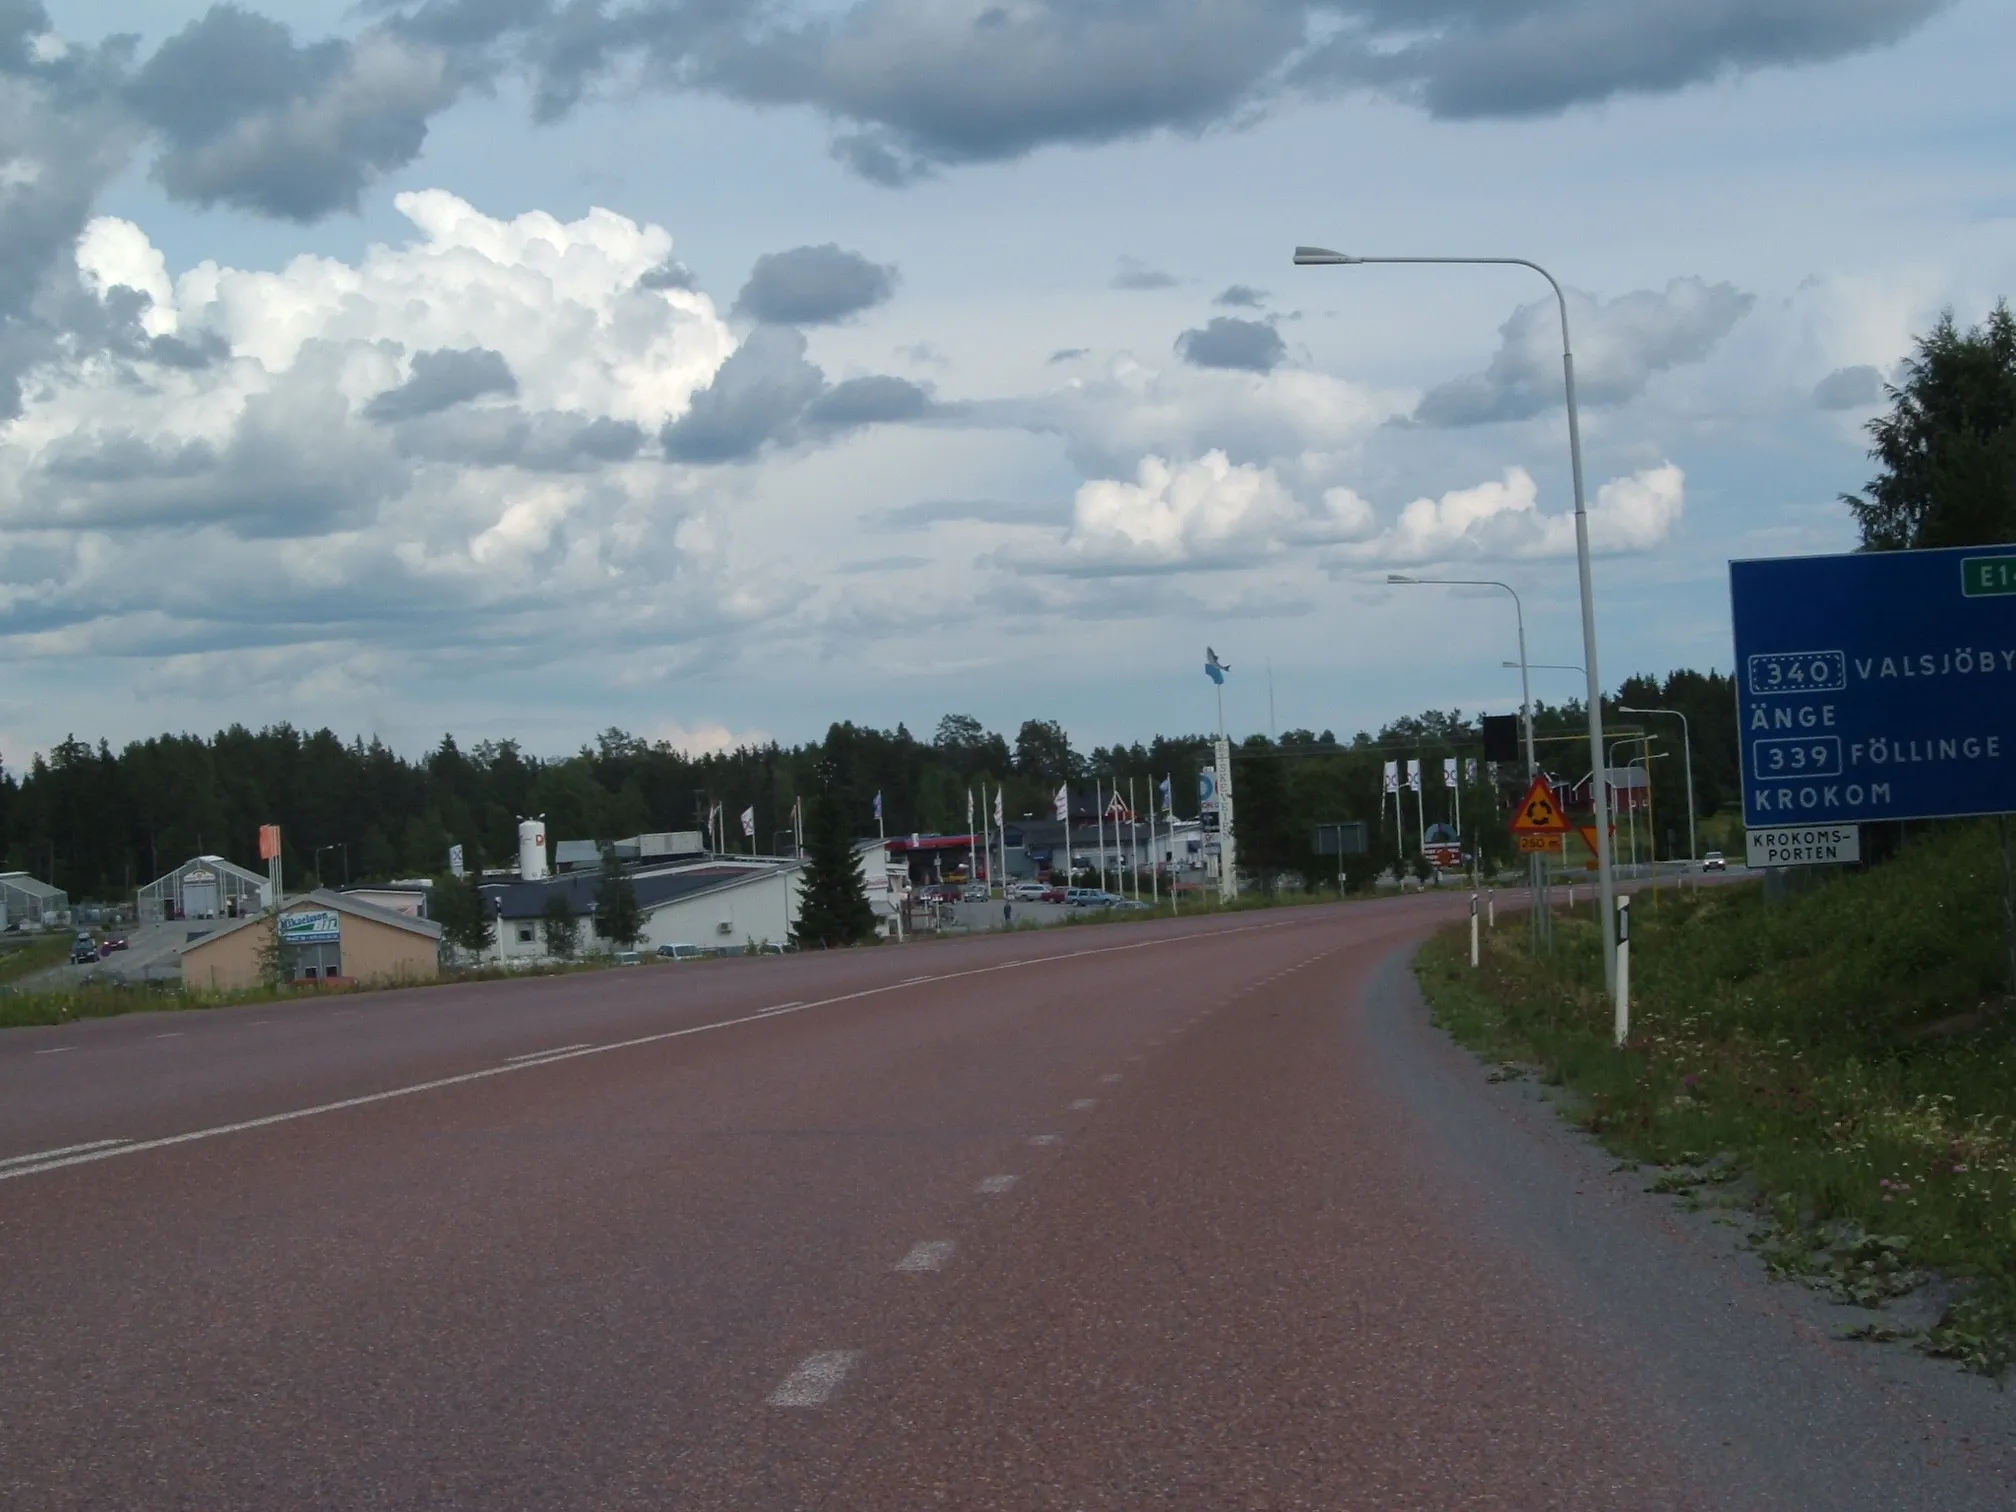 Photo showing: The roundabout of E14 and county road 339 in Krokom, Sweden